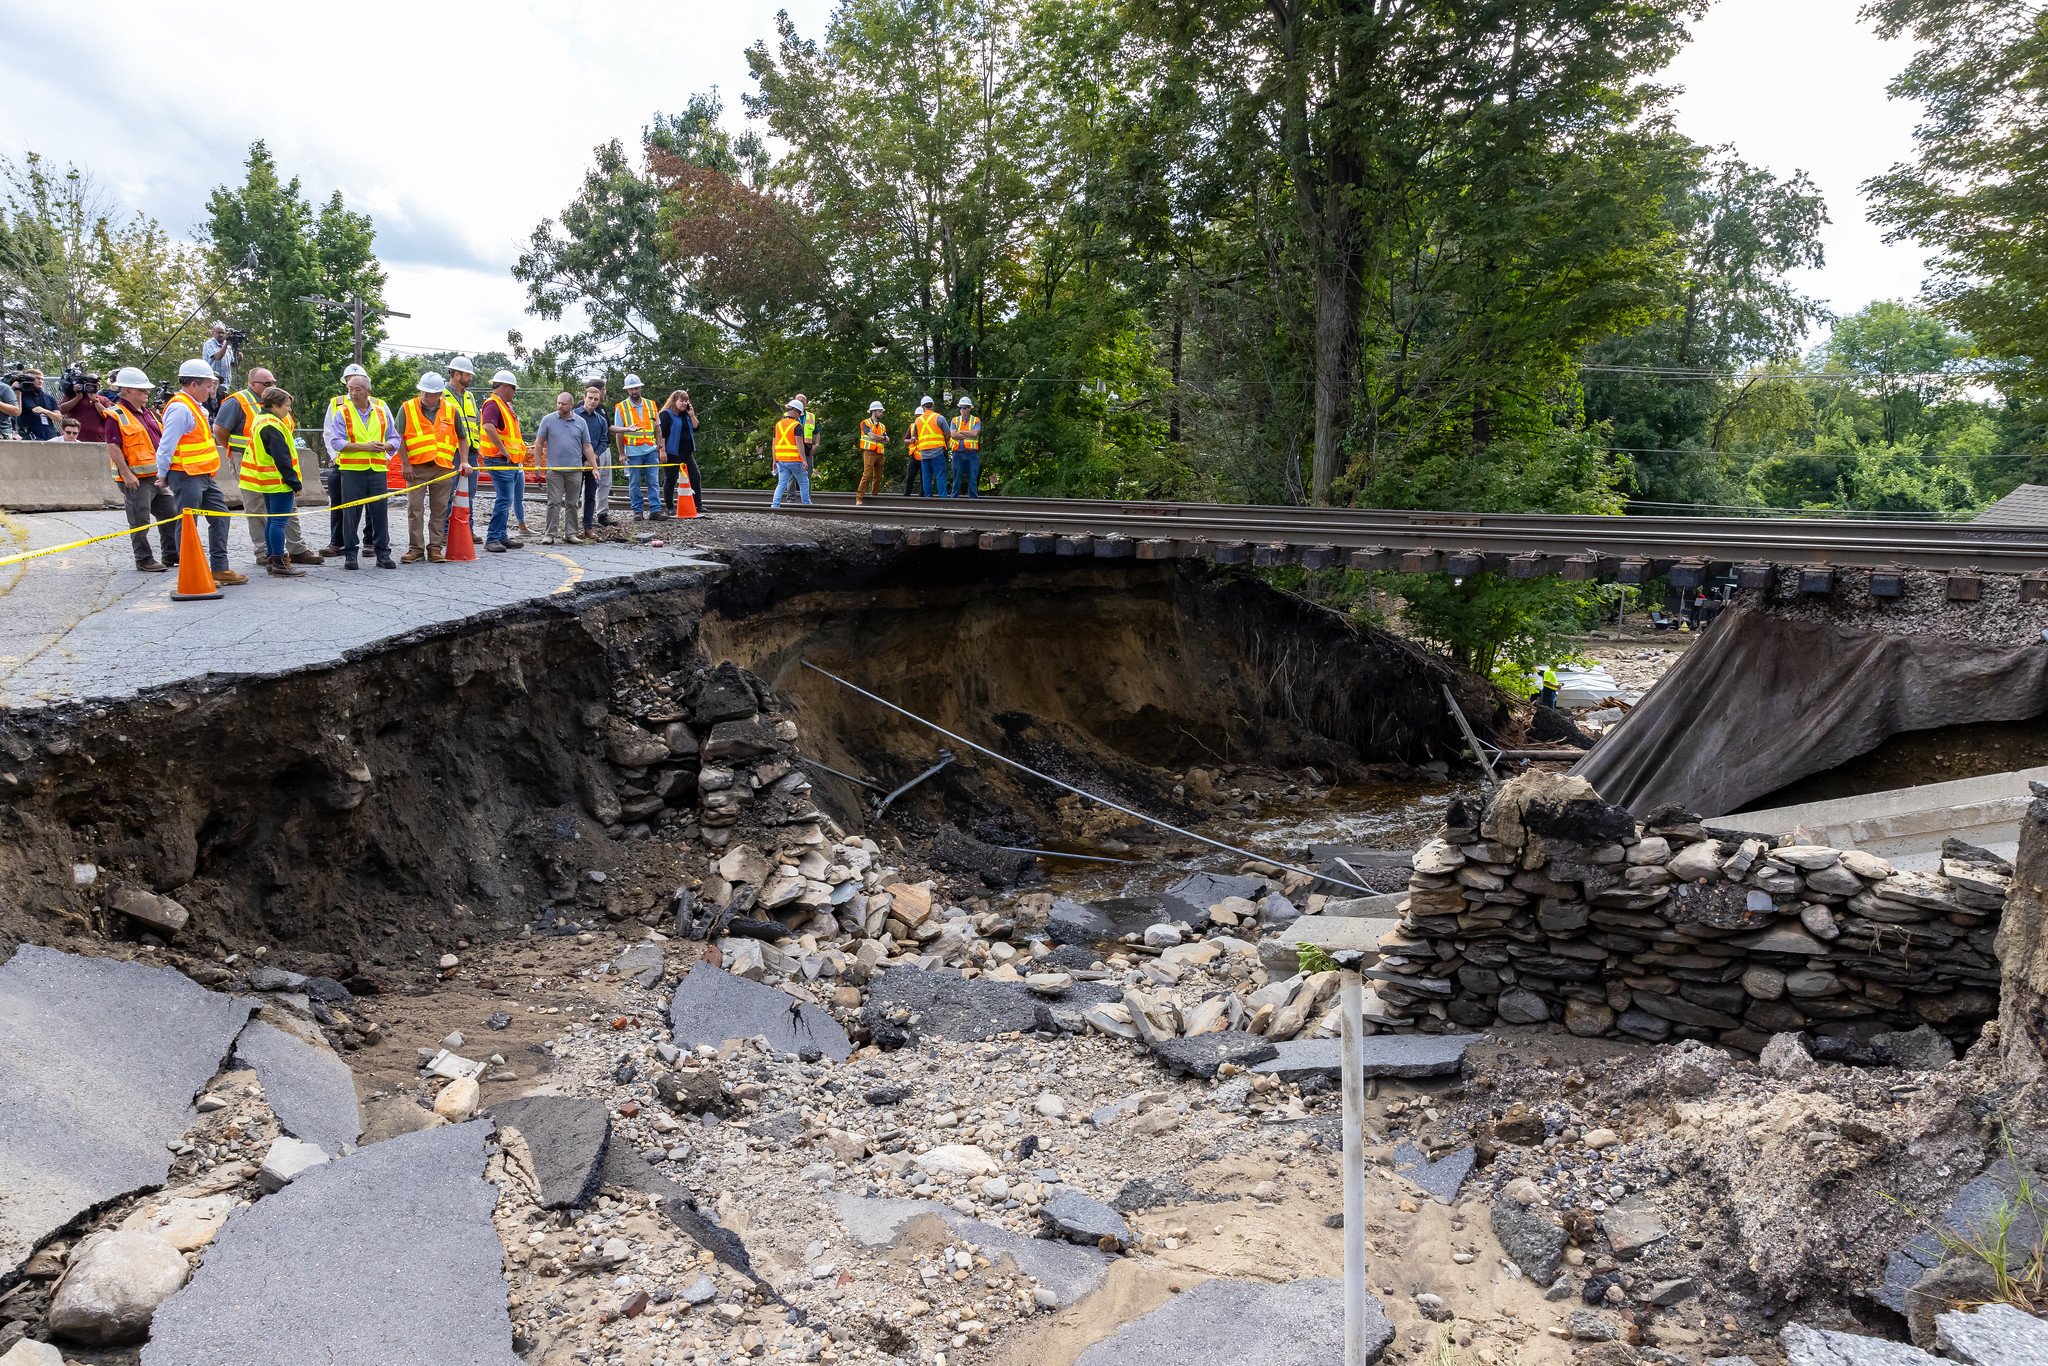 A group of people in construction vests stands on asphalt next to a large, washed-out gully that has destroyed a roadway and undermined a railroad. To their right, steel rails and their wooden ties are suspended in midair above the washout.